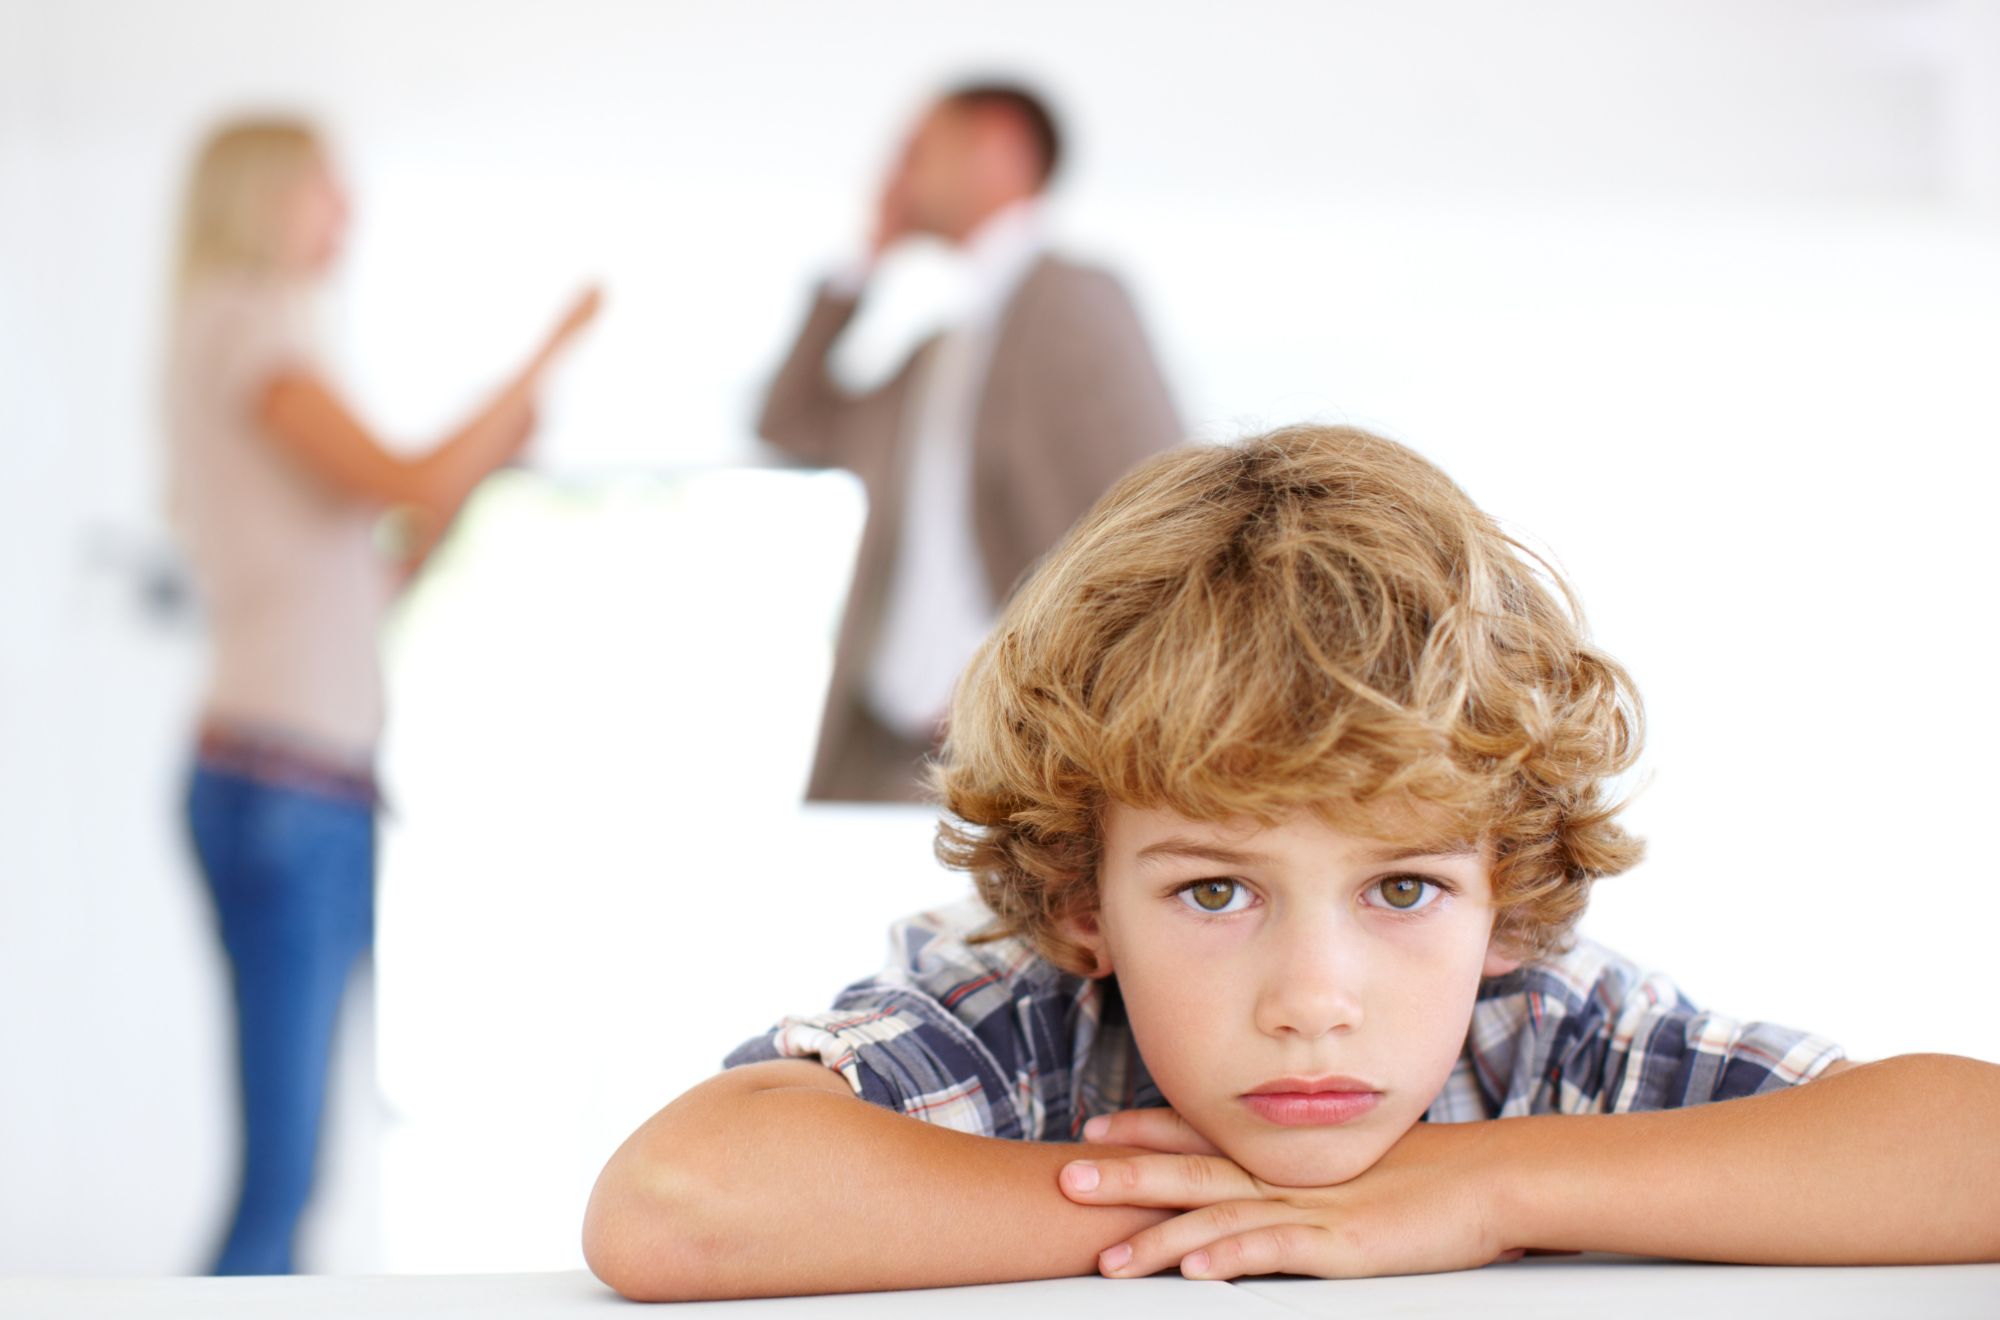 Commerce City High Conflict Child Custody Lawyer